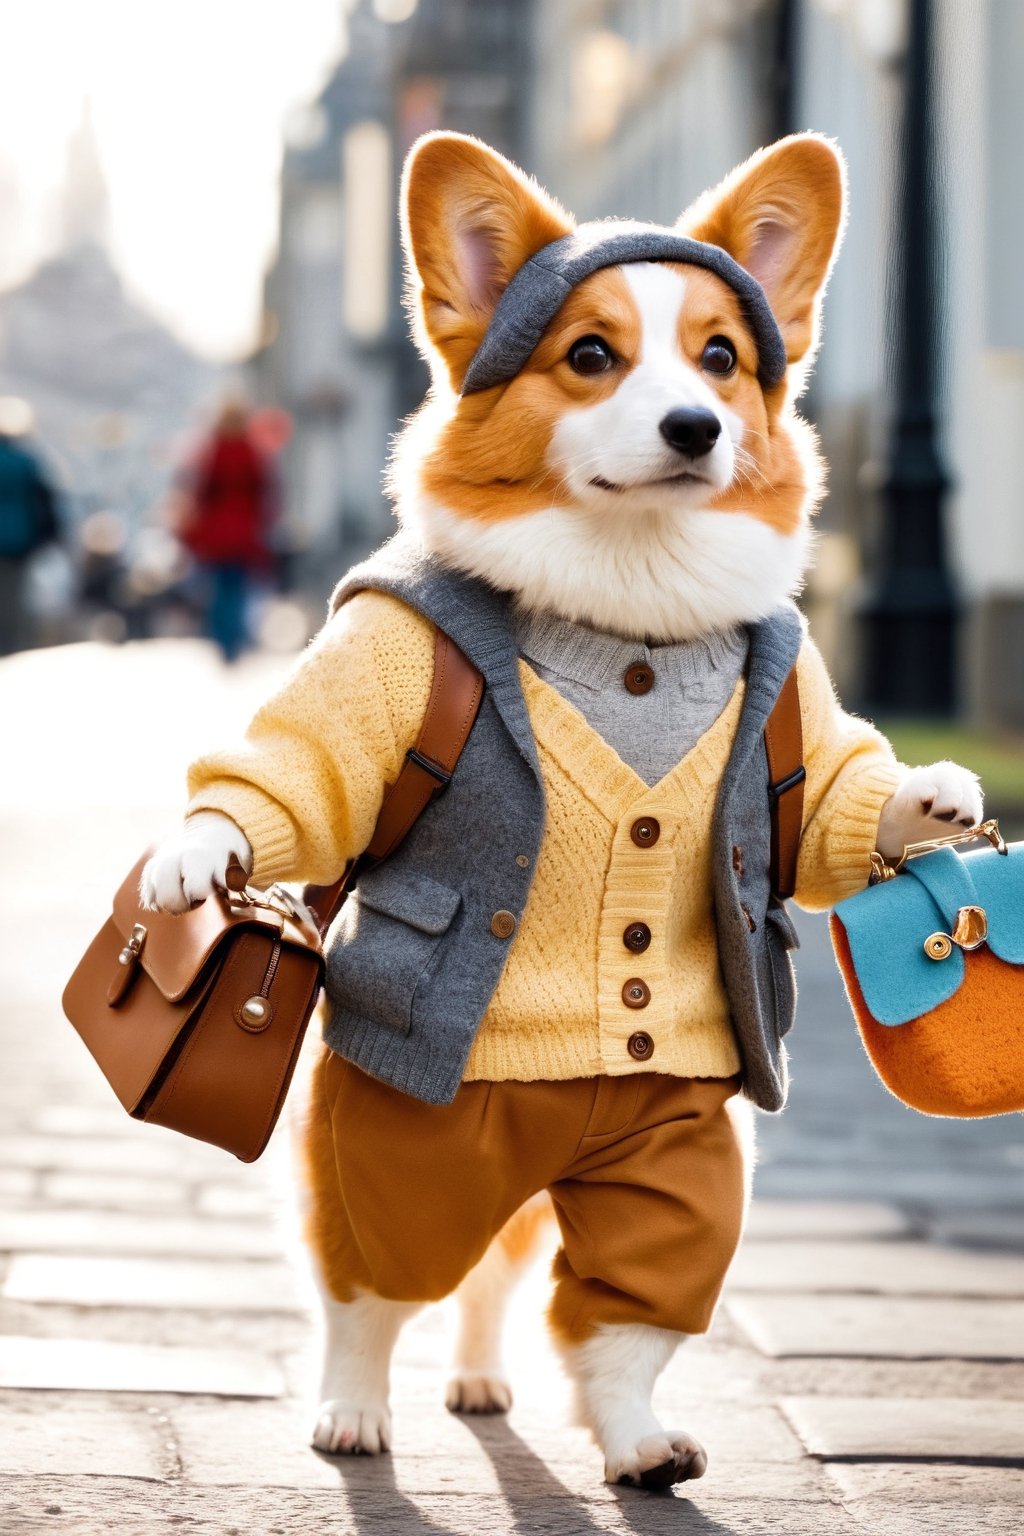 An anthropomorphic Corgi, dressing in cute , wearing fashionable retro style , is walking on the street with small bags hanging from its neck. It has orange fur and big eyes, wearing brown pants, a yellow sweater with gray patterned buttons, a hat made of felt fabric, a handbag and backpack. The photo has a cute pose, standing posture and is a super realistic, full body shot with cinematic light effects and depth of field. The photography has high definition.Perfect head to body ratio